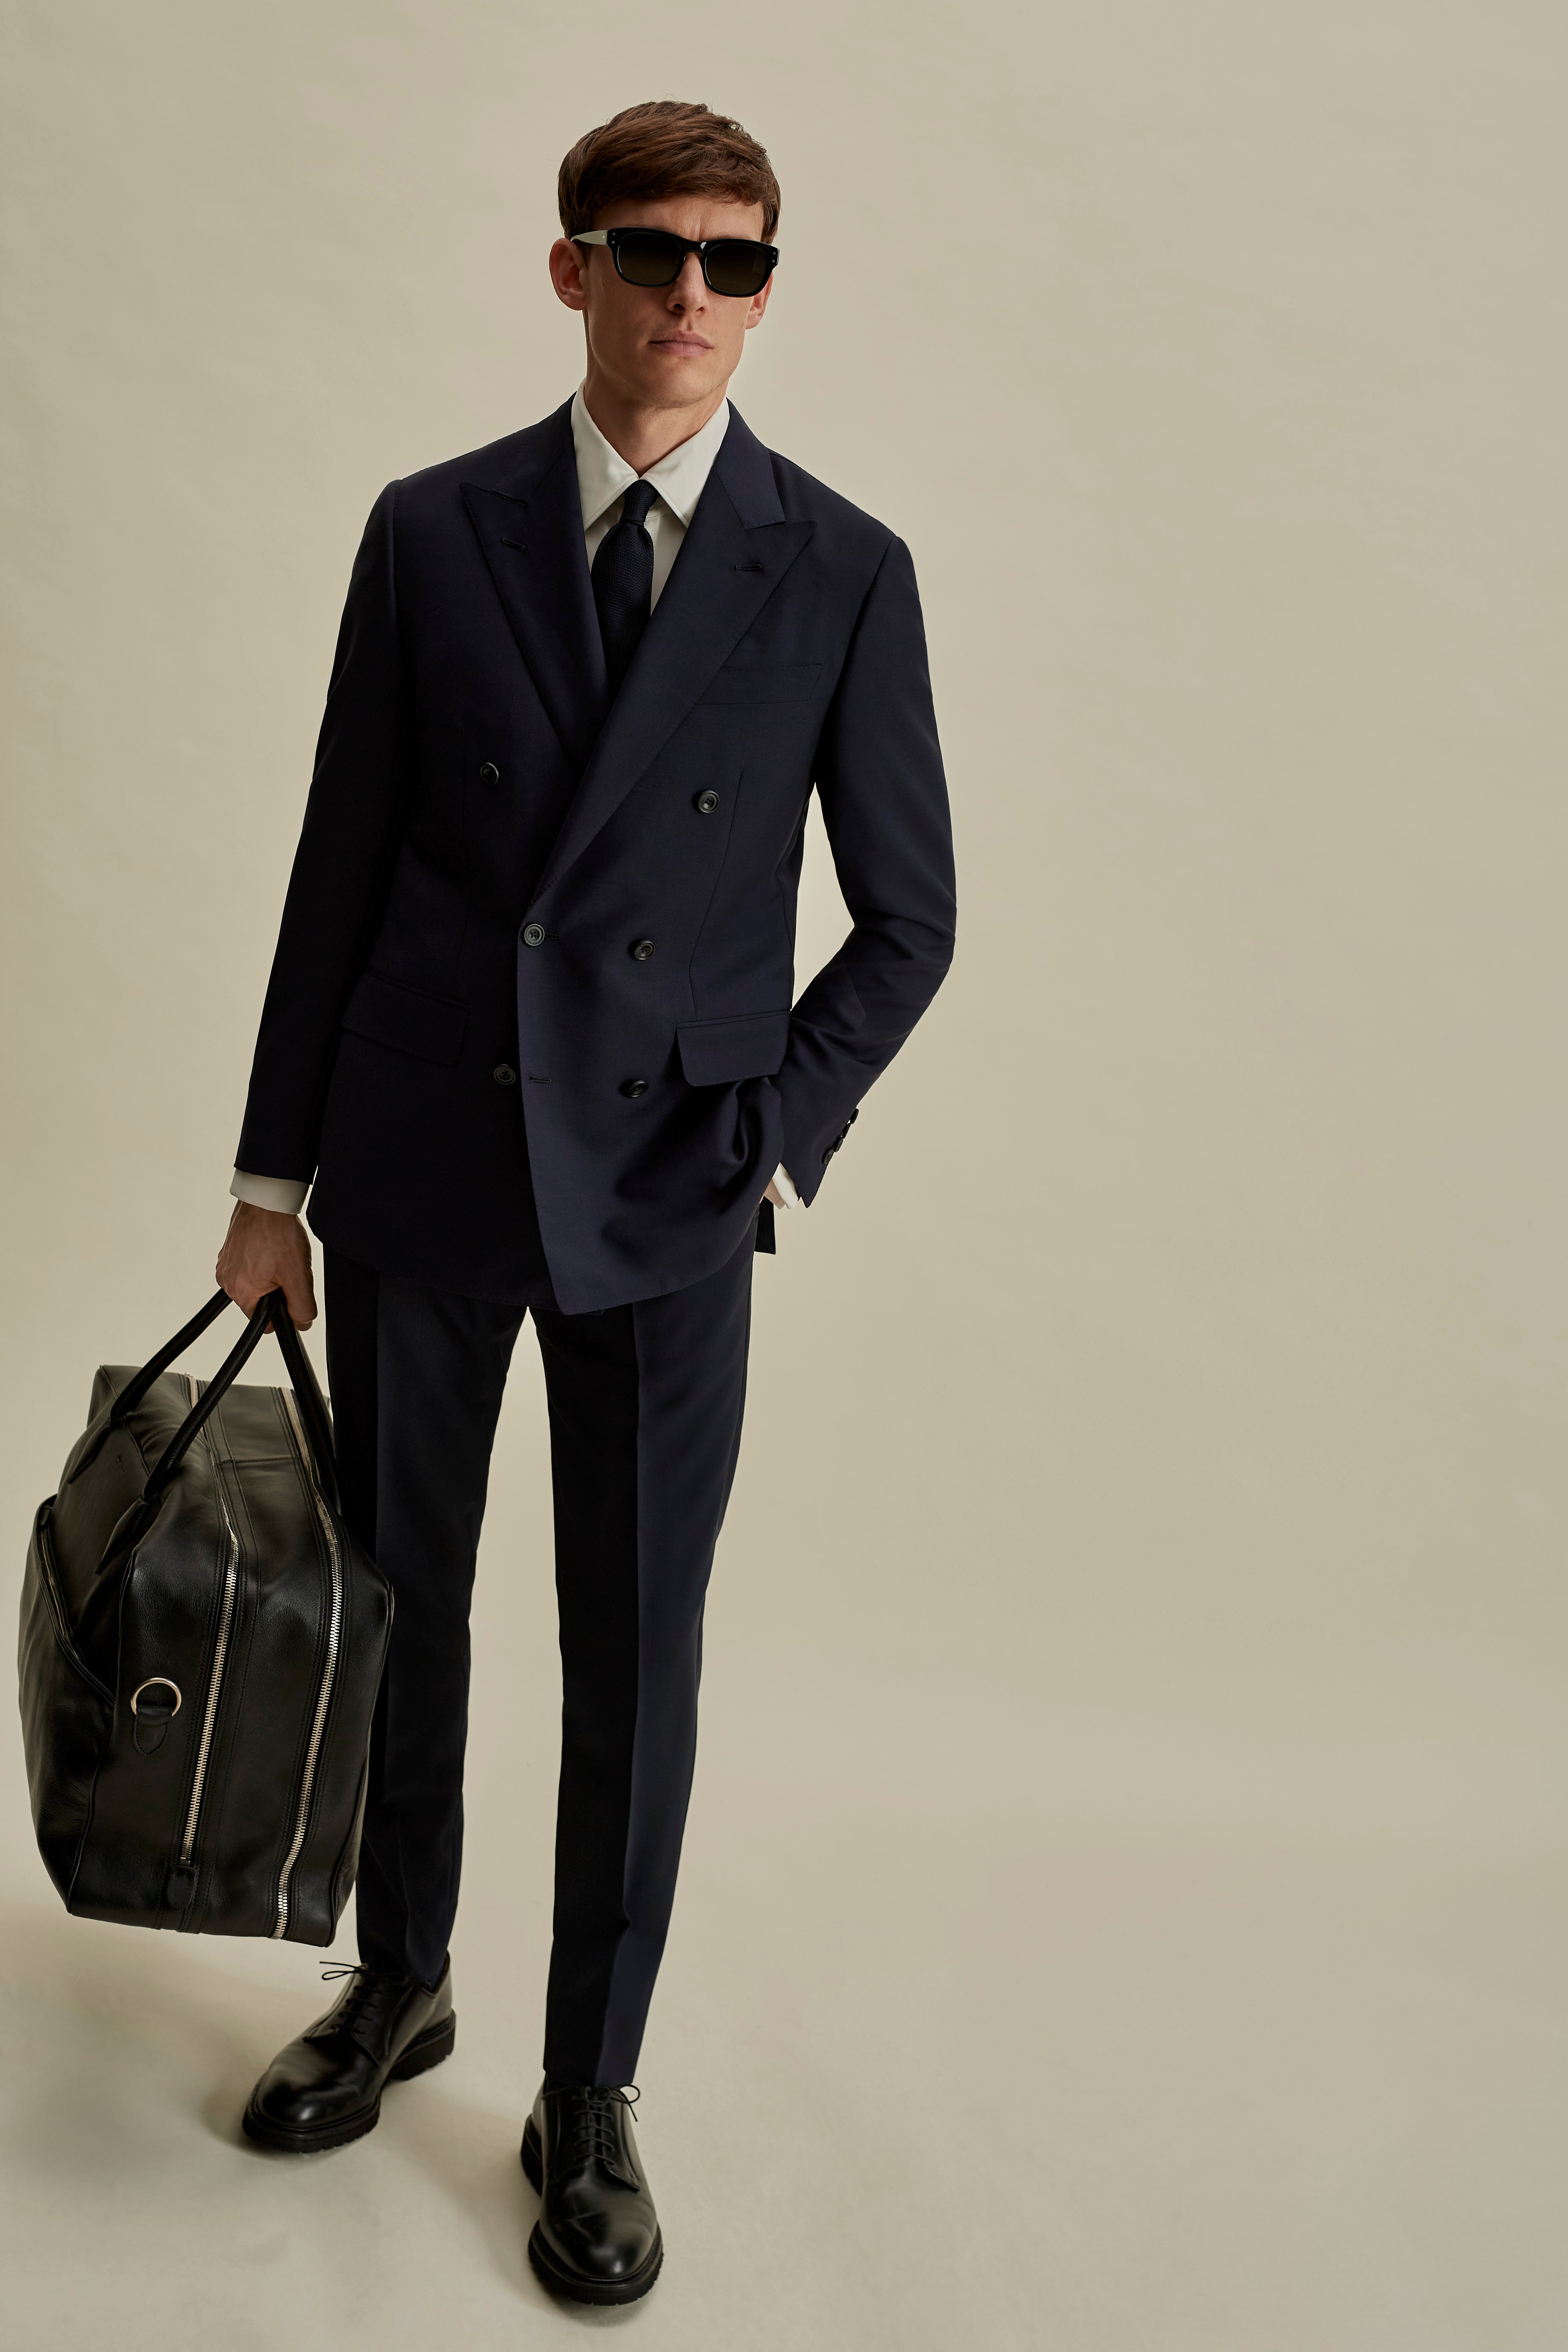 Mohair Double Breasted Peak Lapel Suit Navy Full Length Model Image